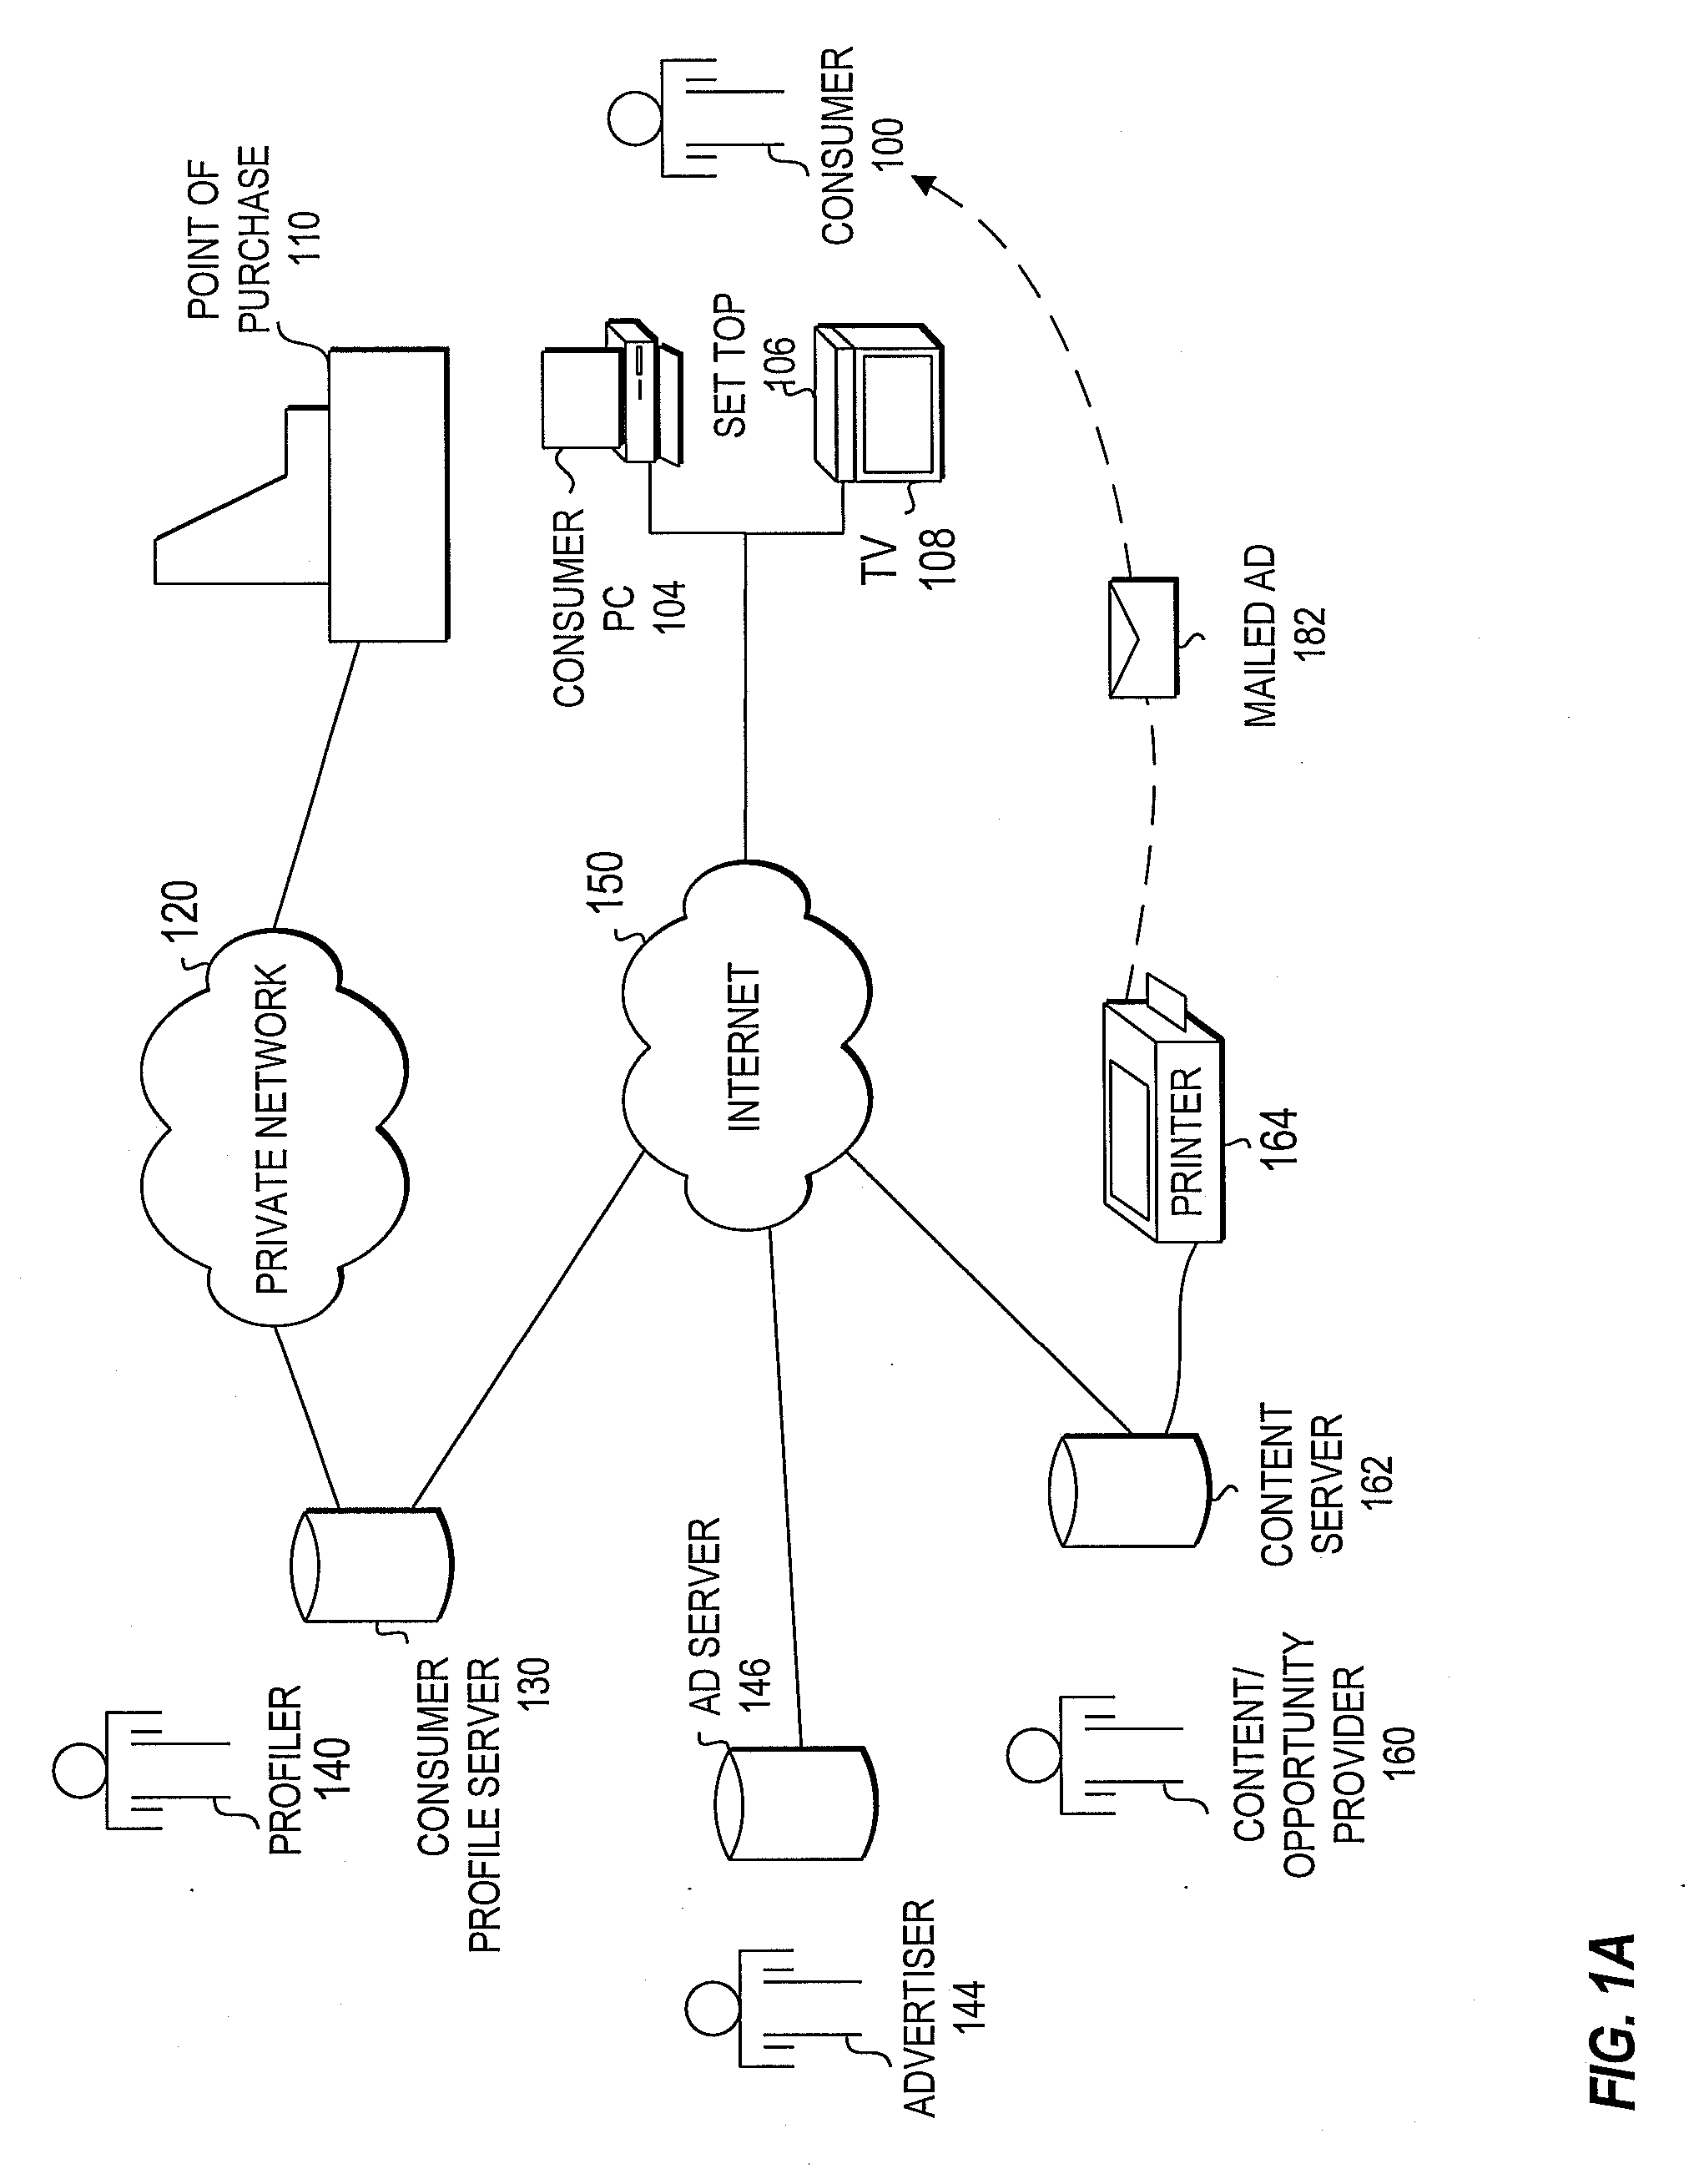 System and Method for Targeting Advertisements